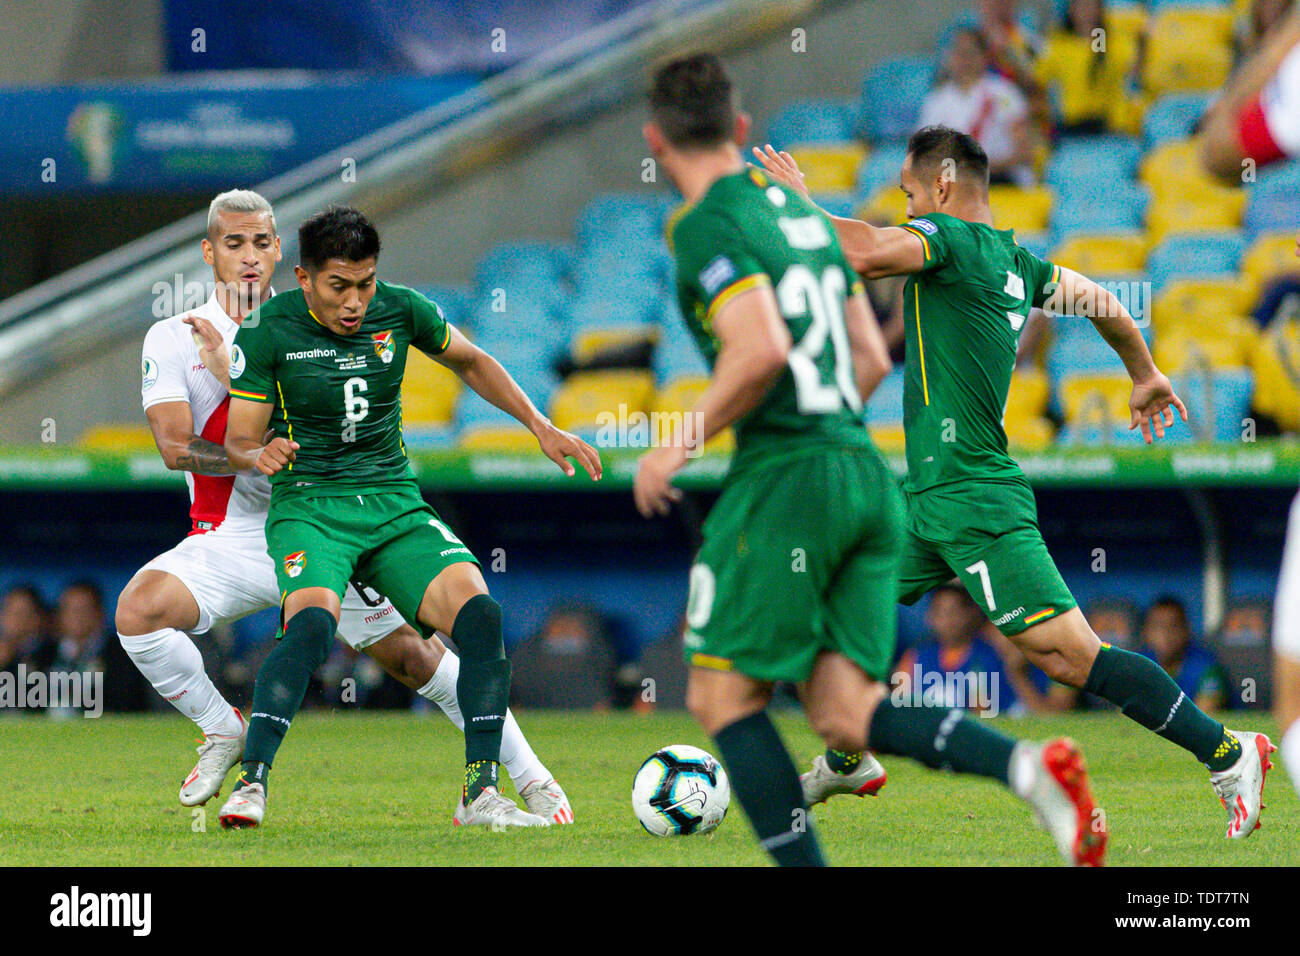 Rio De Janeiro, Brazil. 18th June, 2019. Saavedra Flores (Zagueiro) and Miguel Trauco (Zagueiro) during a match between Bolivia and Peru, valid for the group stage of the Copa America 2019, held this Tuesday (Maracanã Stadium) in Rio de Janeiro, RJ. Credit: Celso Pupo/FotoArena/Alamy Live News Stock Photo